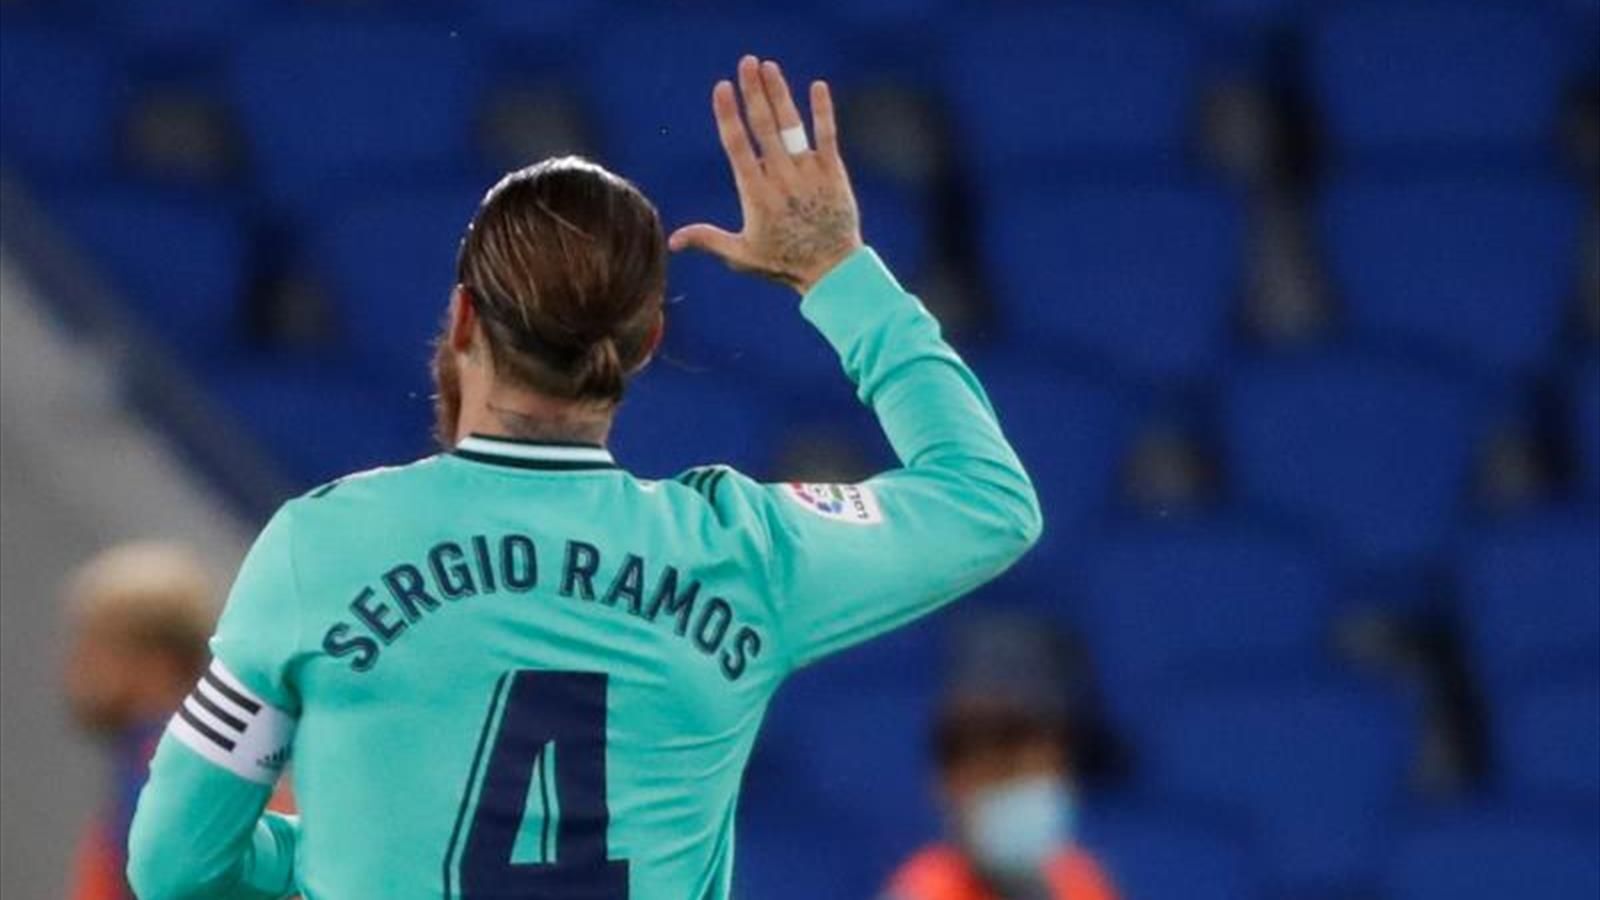 Ramos of Real Madrid Makes La Liga History in Their Match against Real Sociedad